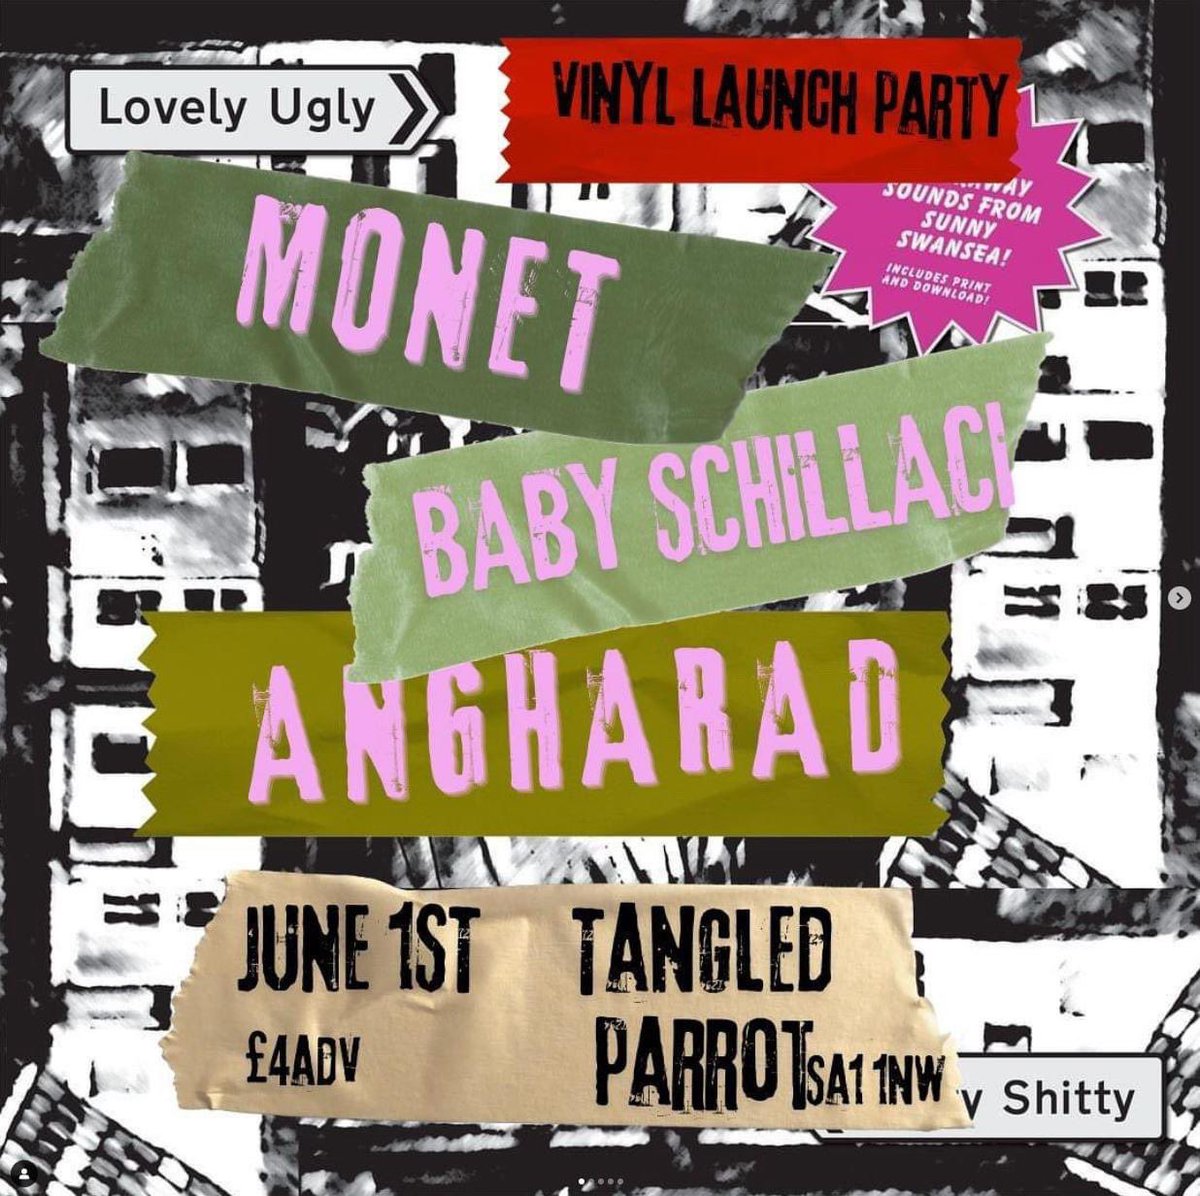 The next gig will be a duo performance along with @monetbanduk and Baby Schillaci for the @RichardREPEAT’s Lovely Ugly Swansea band compilation album launch. Tickets available: wegottickets.com/event/616655?f…